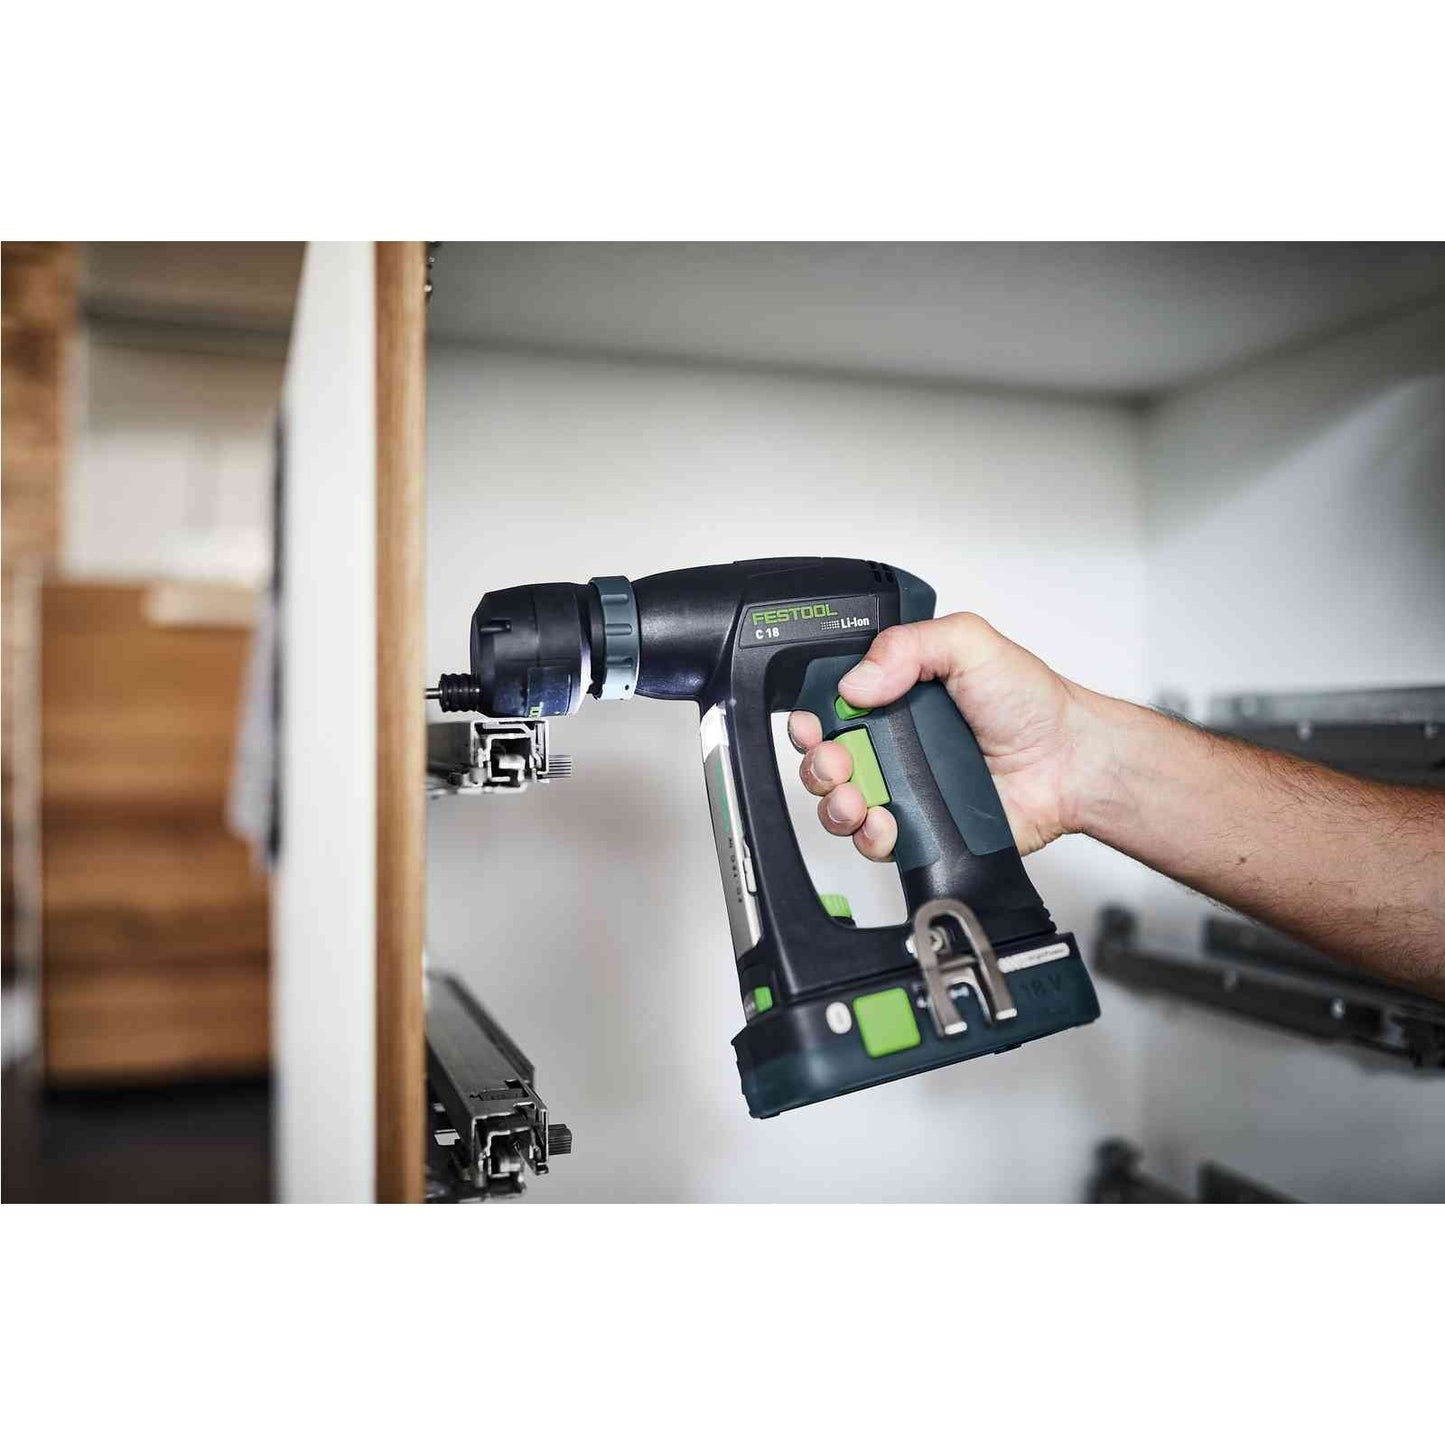 Festool C18 Cordless Drill Kit With Batteries & Charger 576434-KIT tool-junction-nz